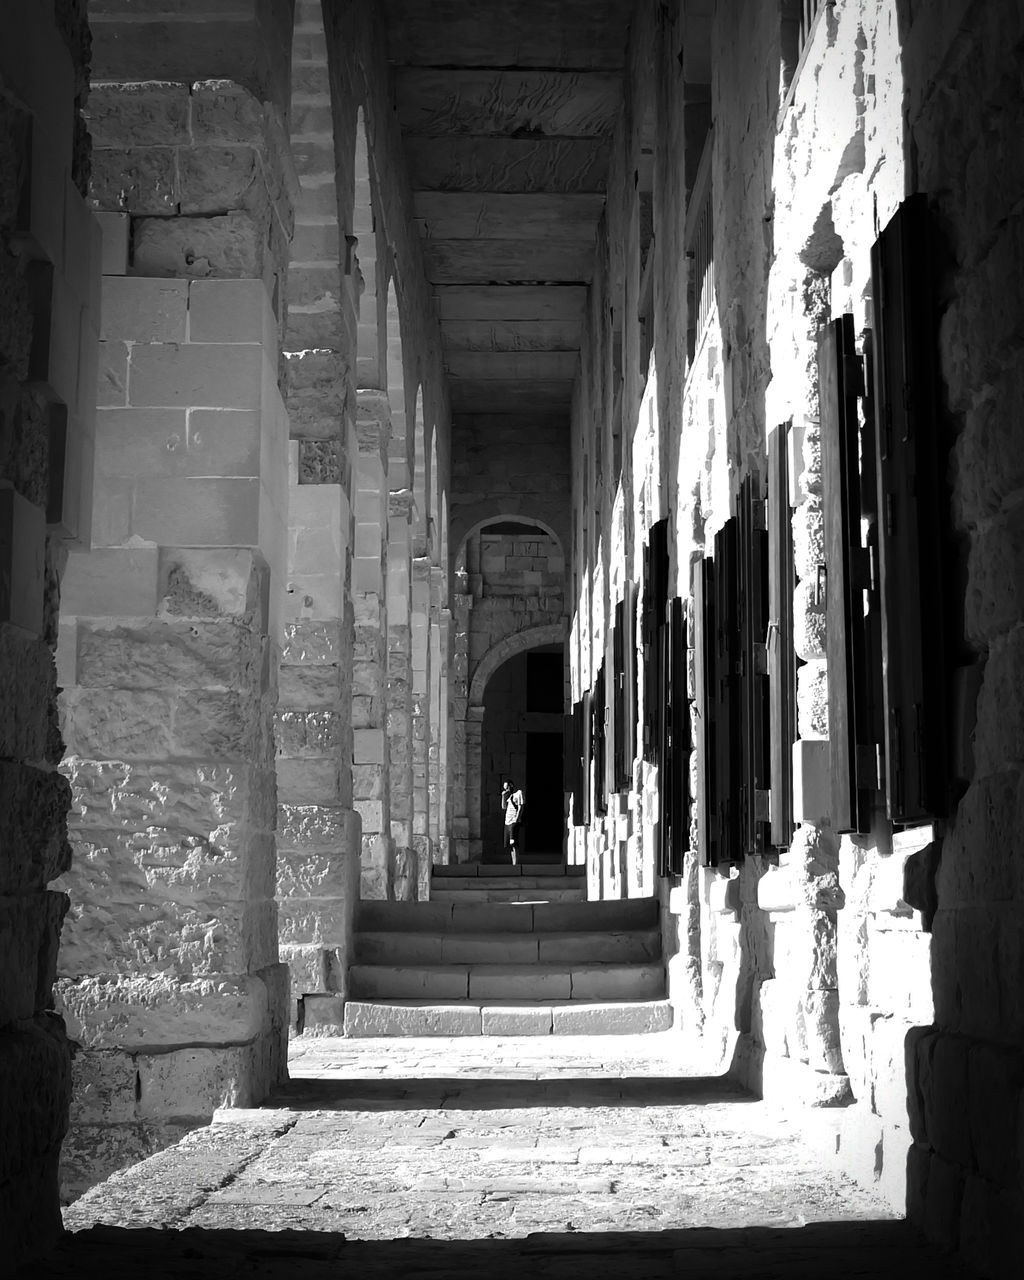 architecture, built structure, building, the way forward, direction, old, the past, arch, day, history, indoors, arcade, no people, architectural column, abandoned, corridor, staircase, damaged, sunlight, diminishing perspective, deterioration, ruined